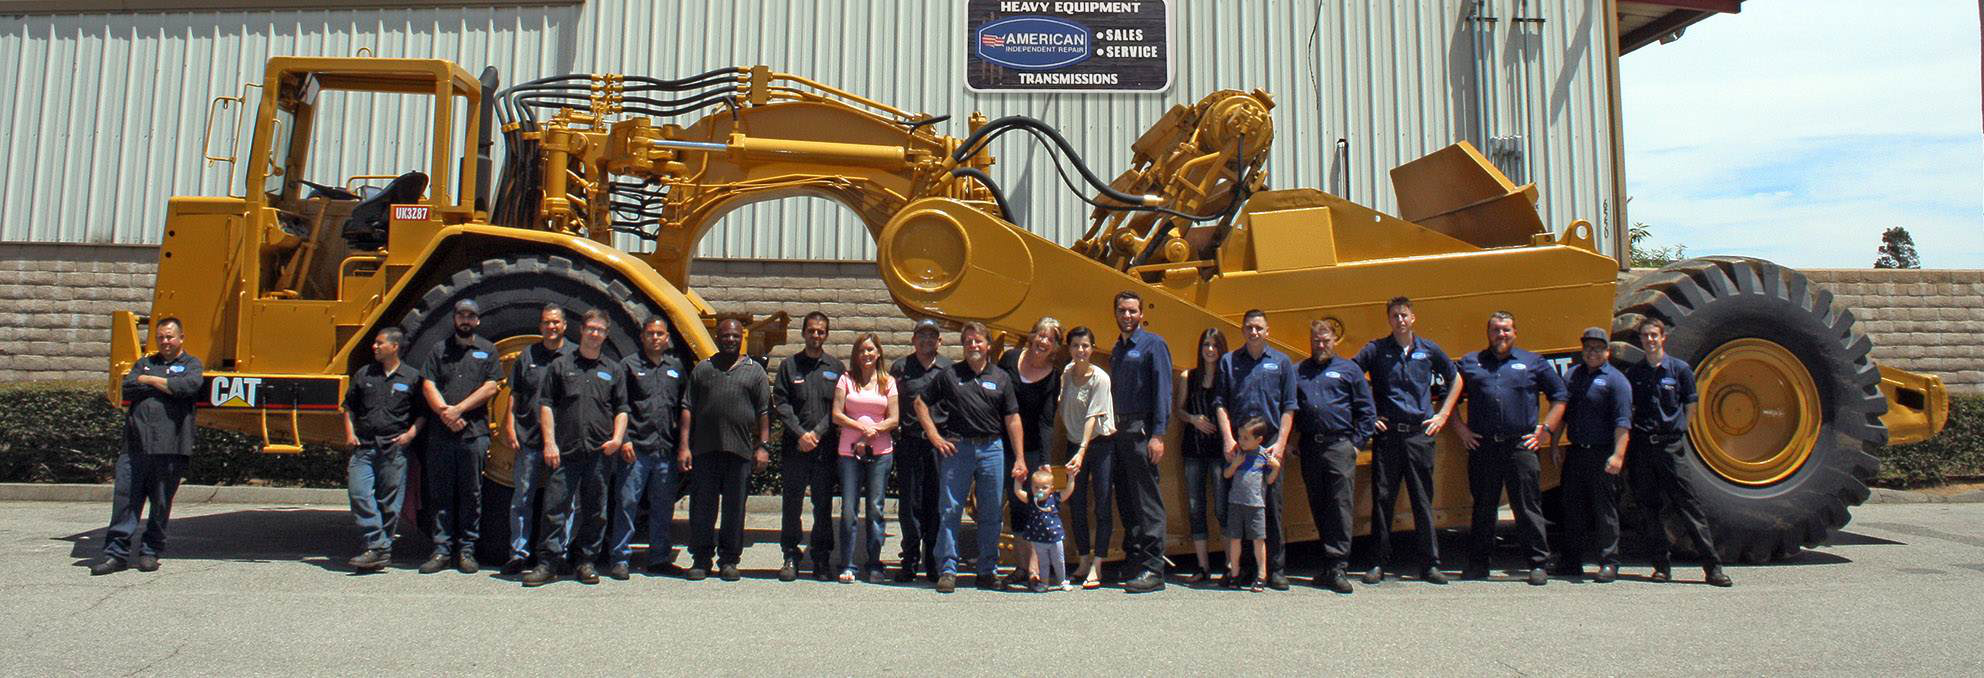 American Independent, Inc. crew standing in front of CAT charlotte nc dump trucks 